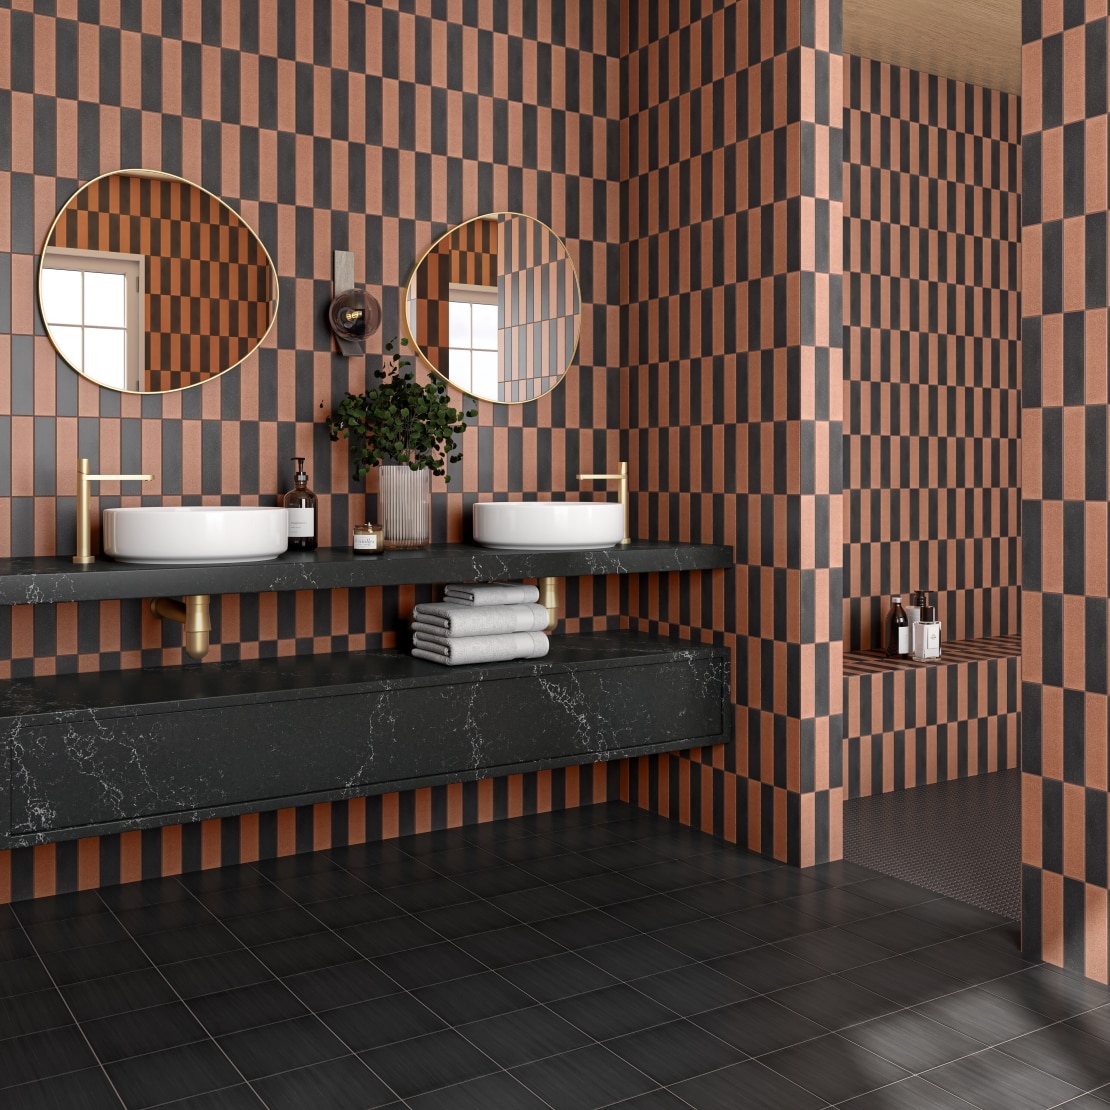 Contemporary bathroom with checkered walls, double sinks and black countertops.